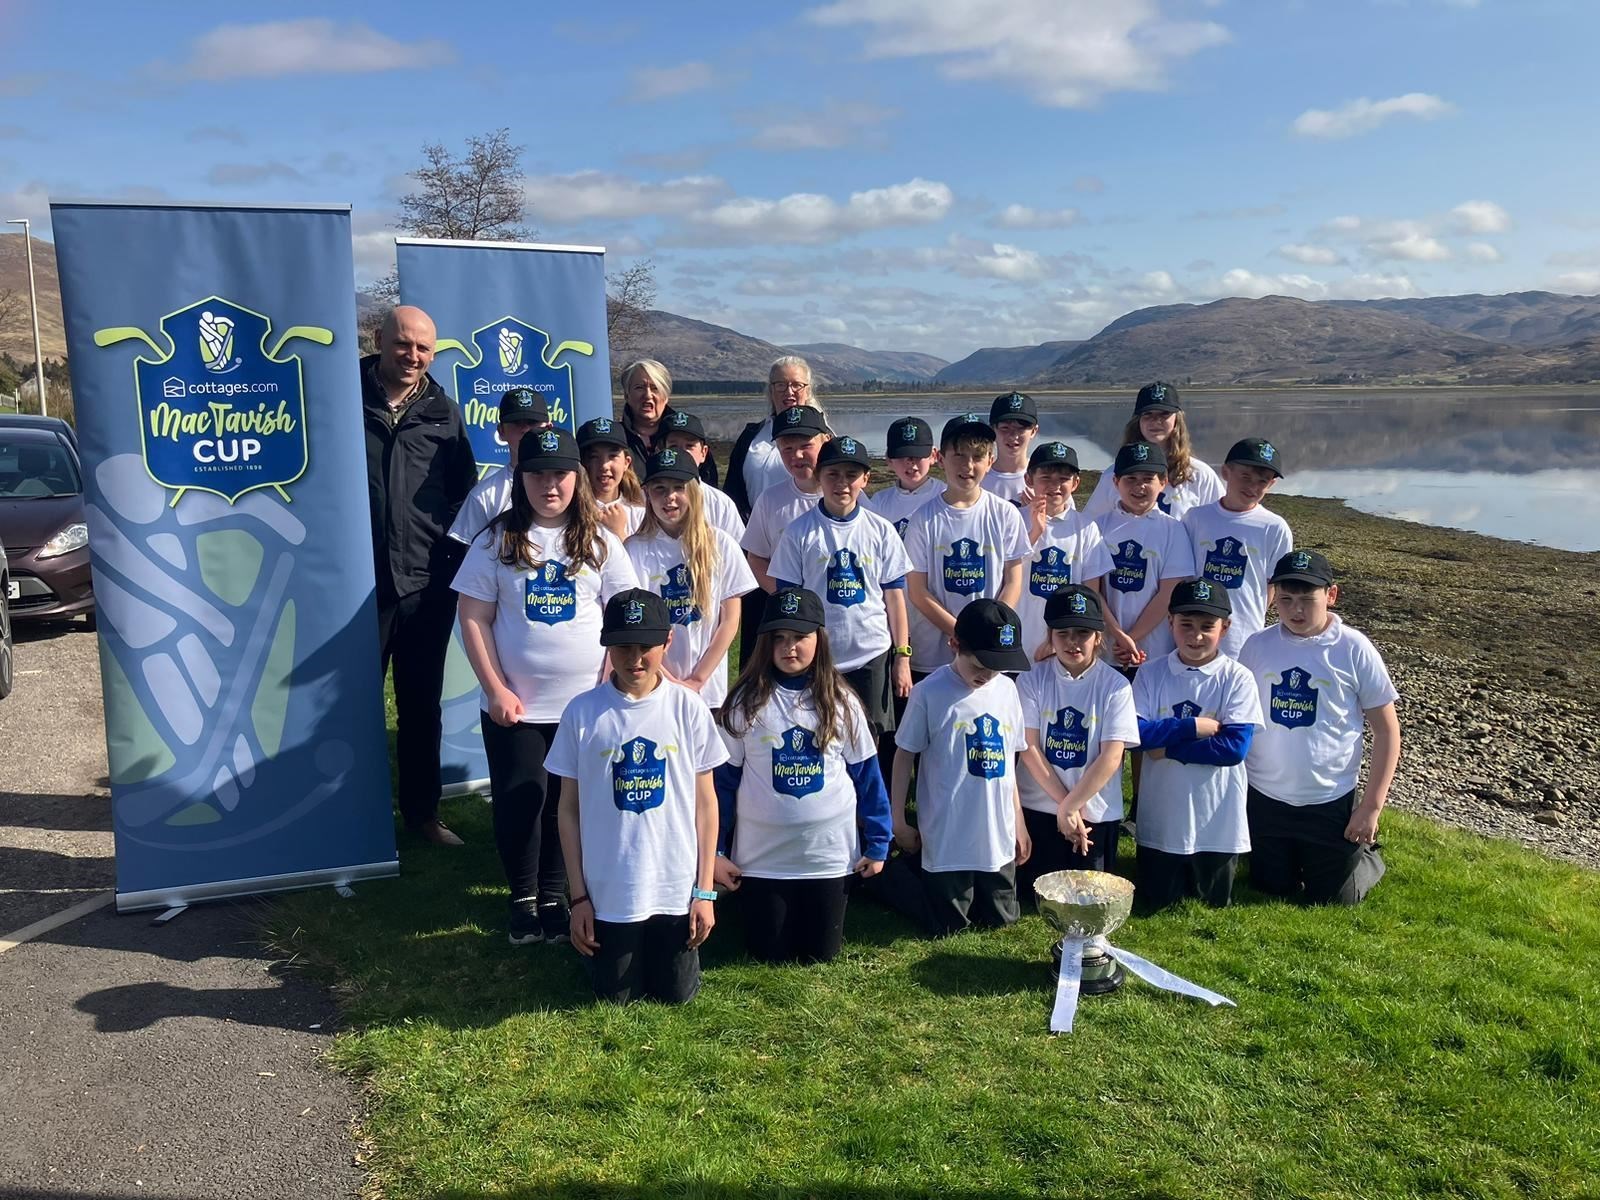 The draw was conducted earlier this afternoon by pupils from Lochcarron Primary School.